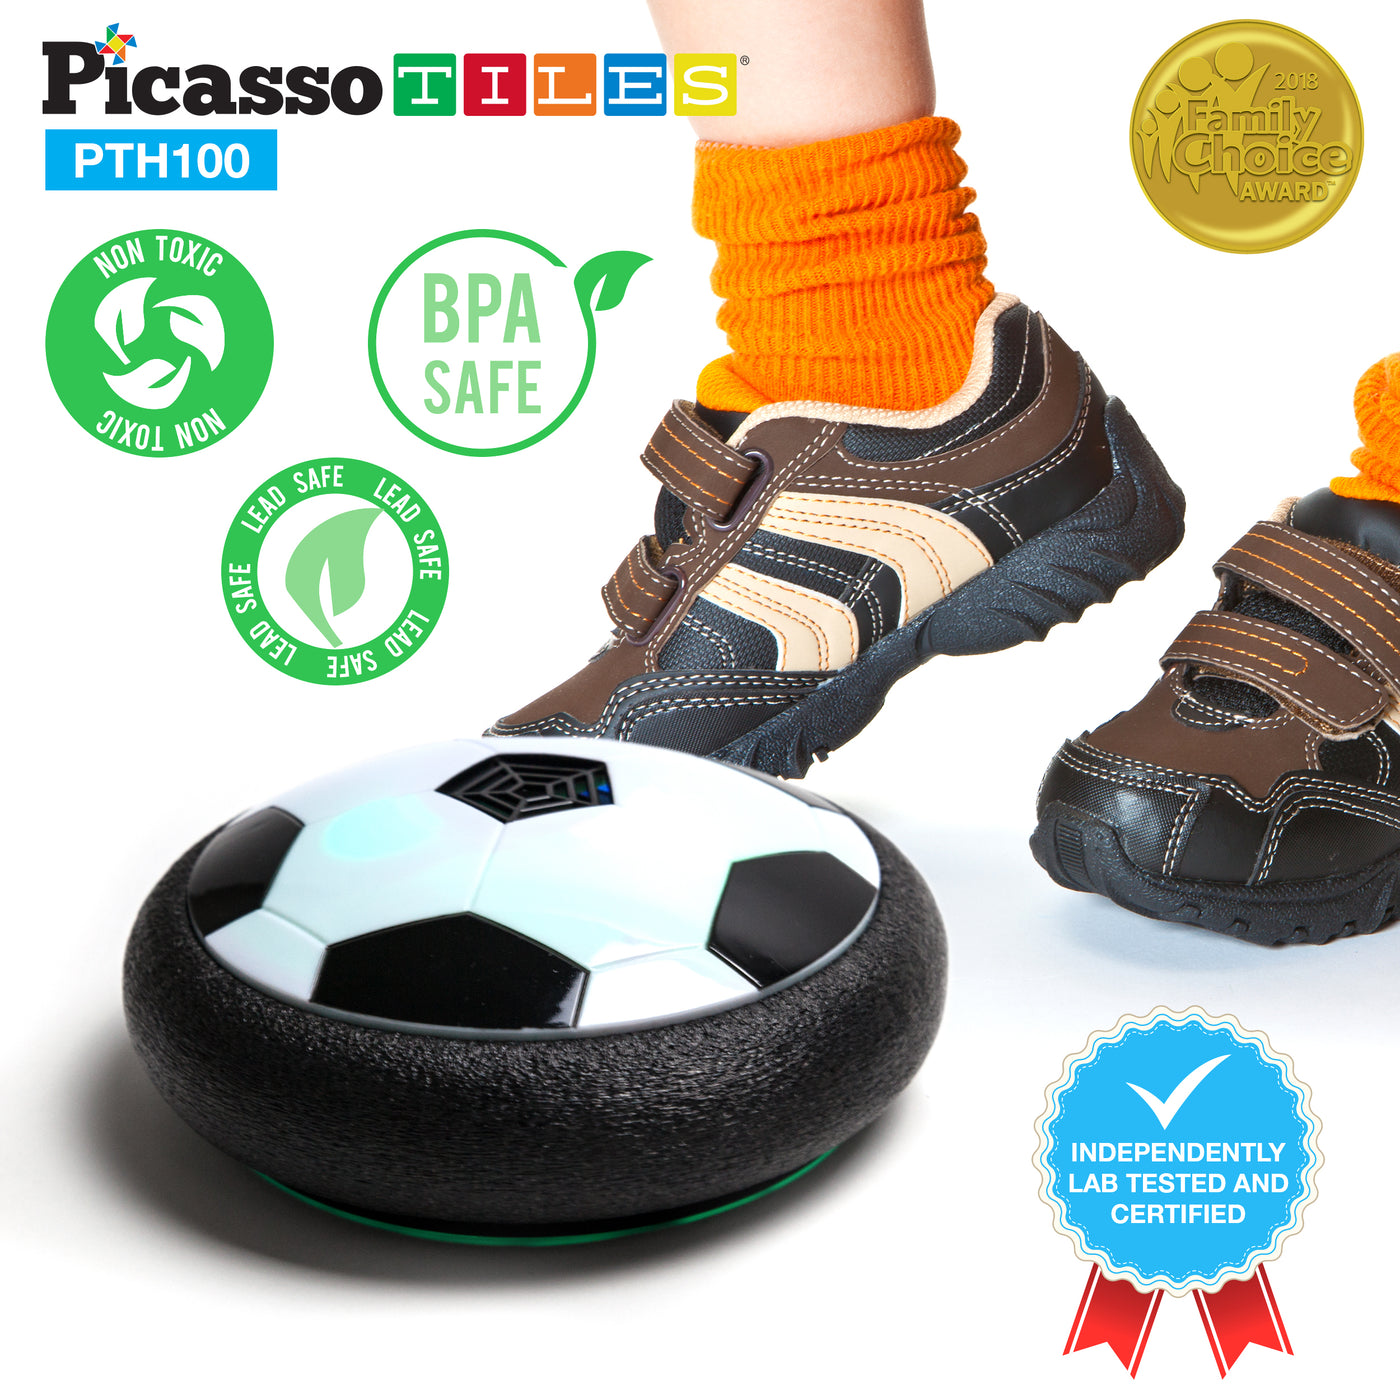 PicassoTiles Hover Soccer Ball with Protective Bumper Foam